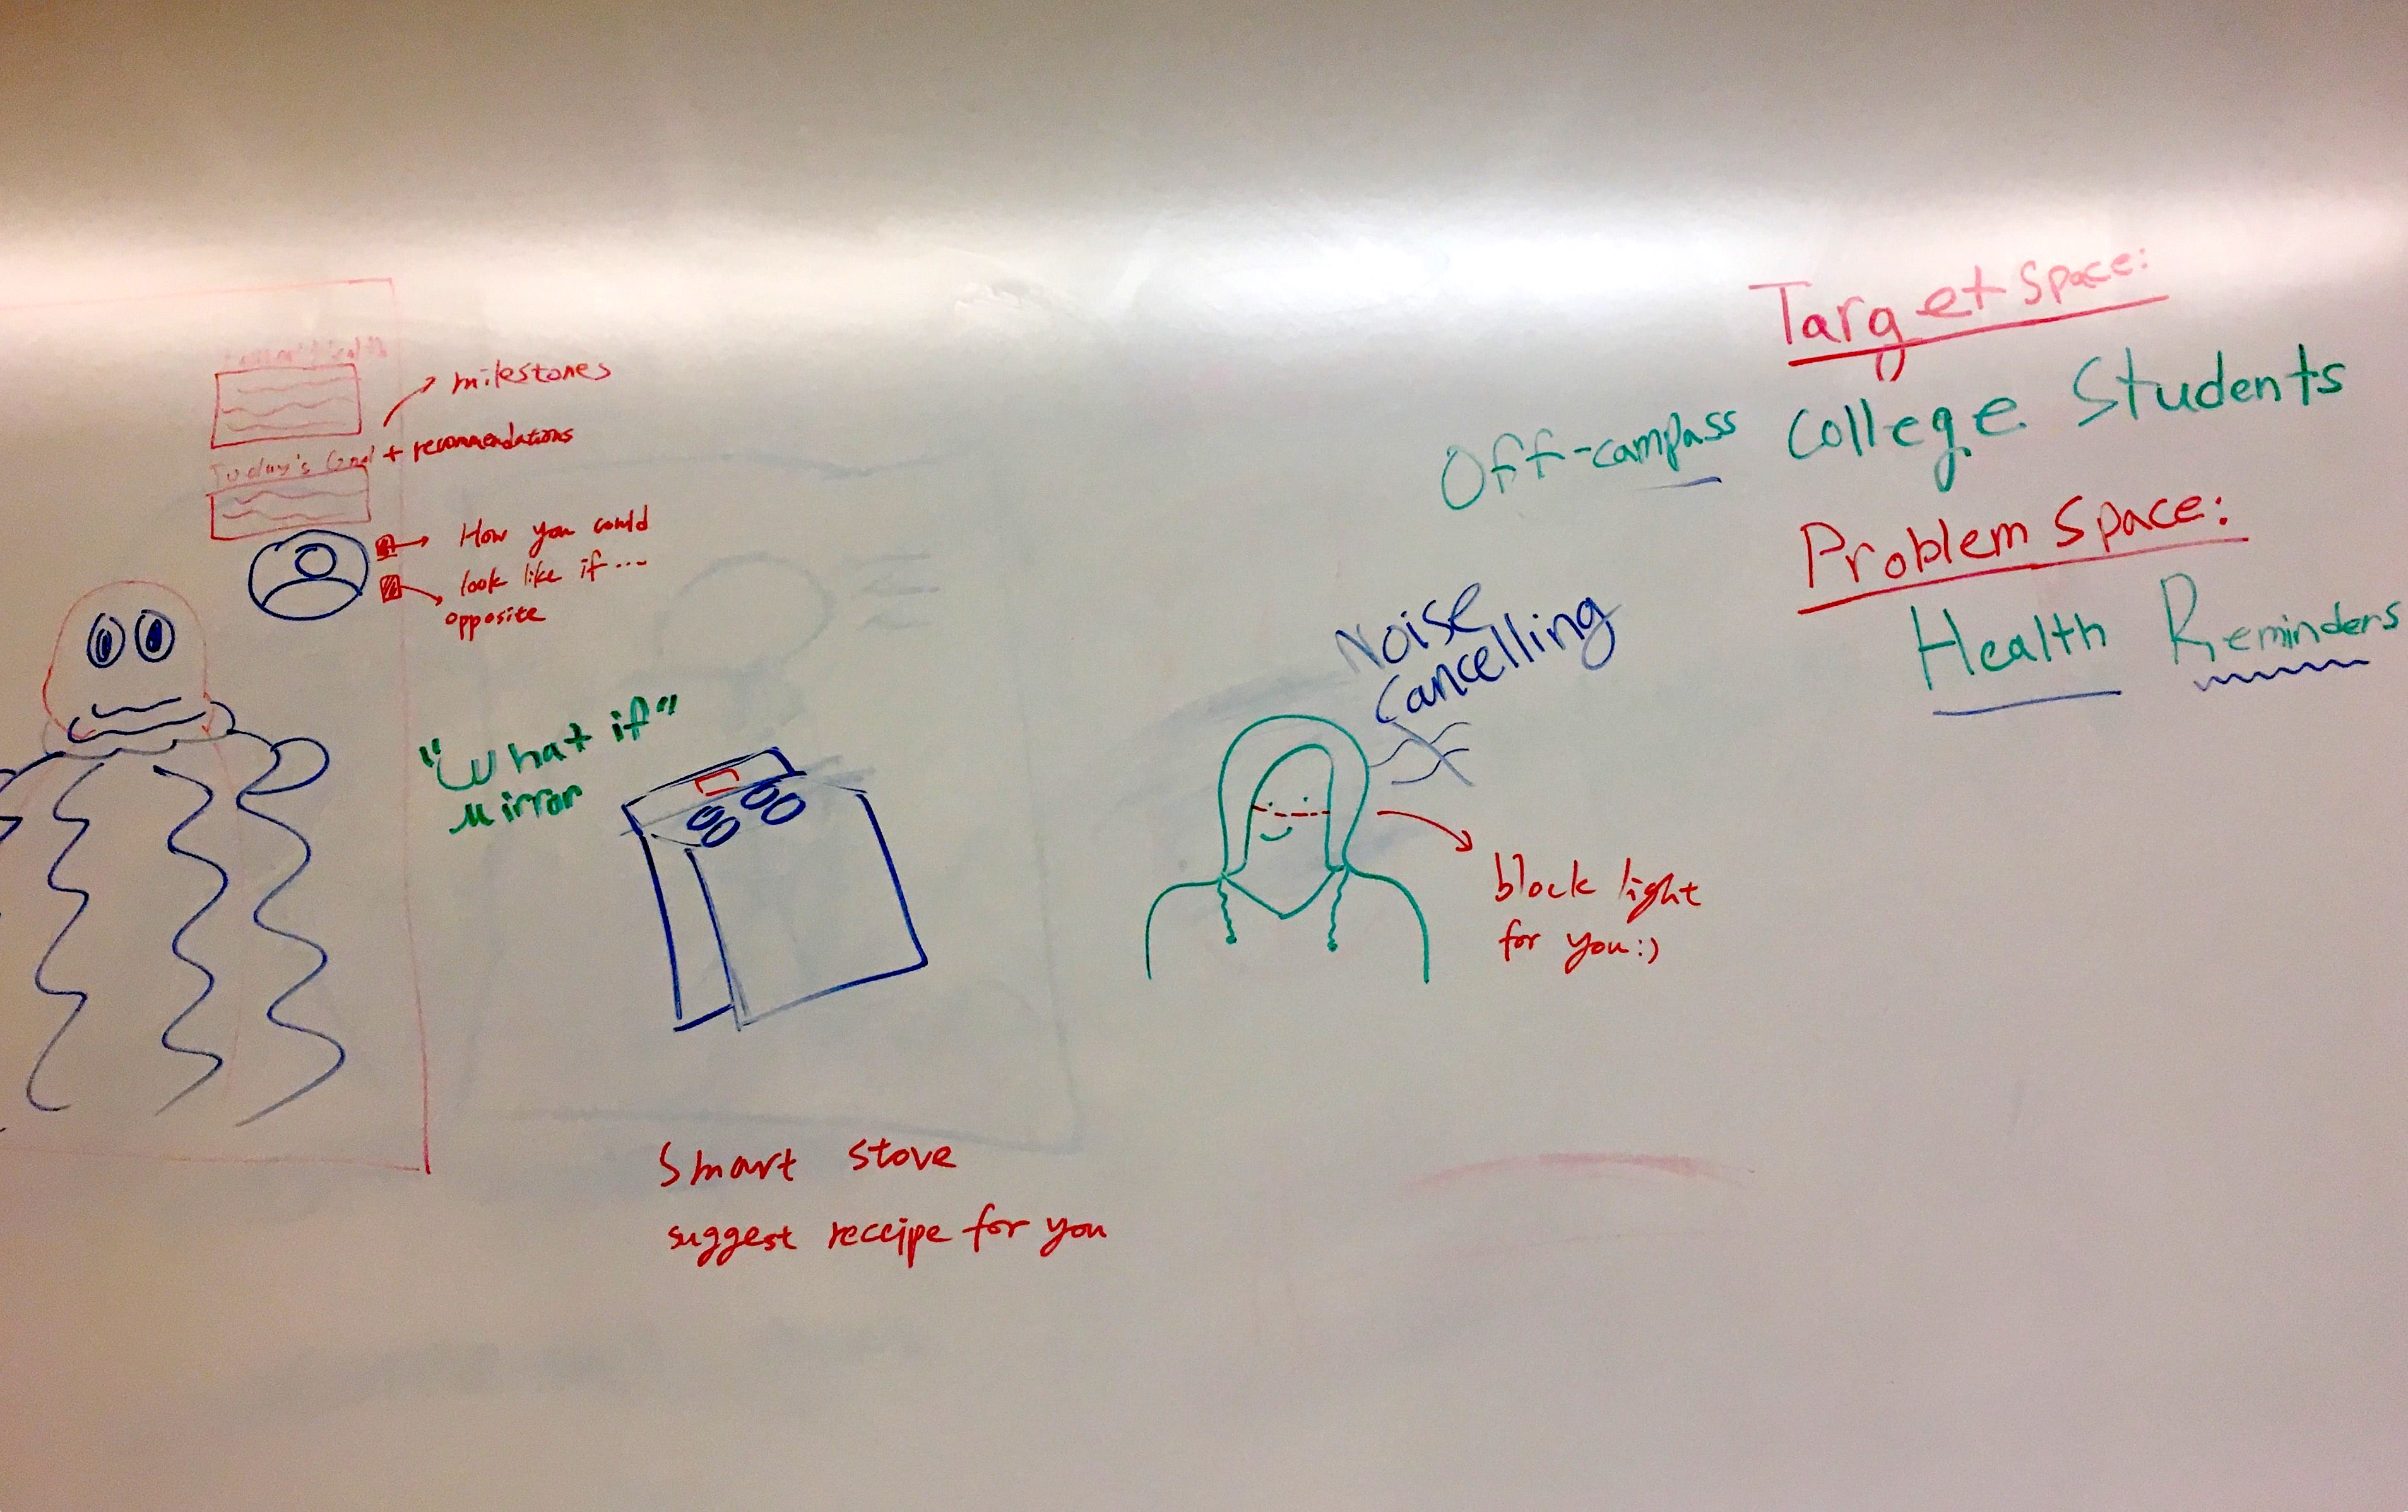 A picture of whiteboard sketches for day 1.